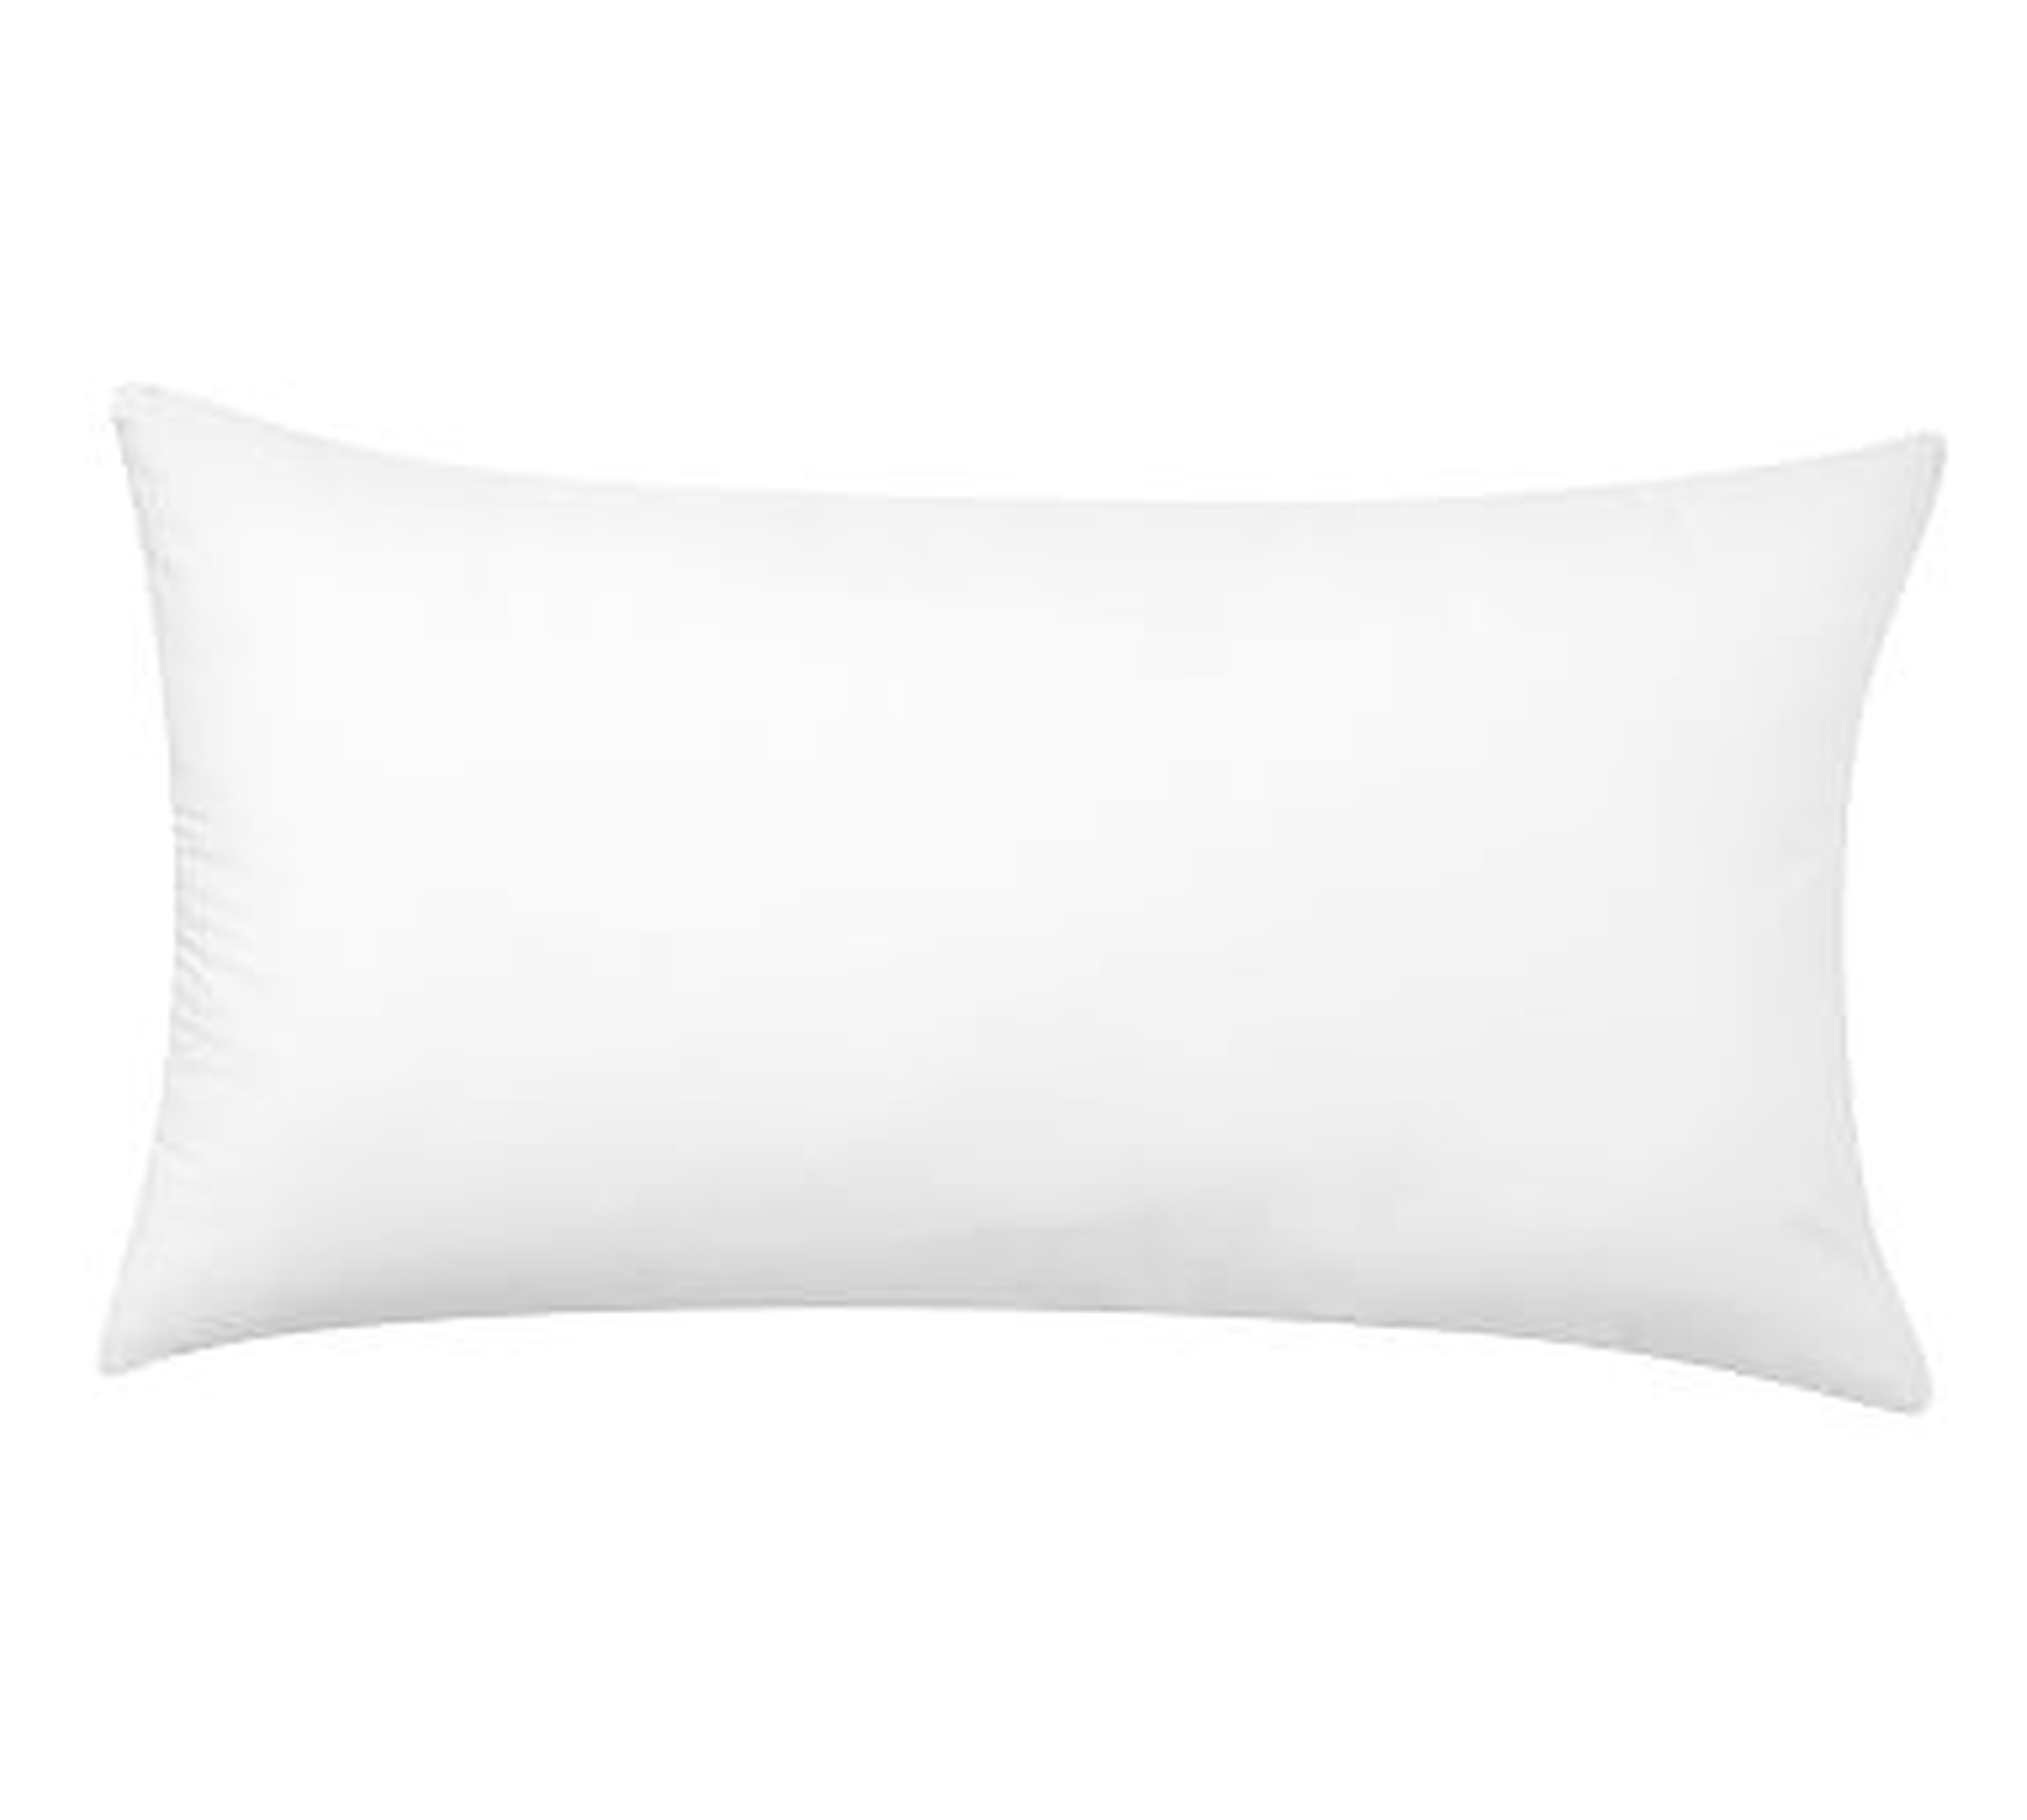 Synthetic Fill King Pillow Insert, 20 x 36" - Pottery Barn